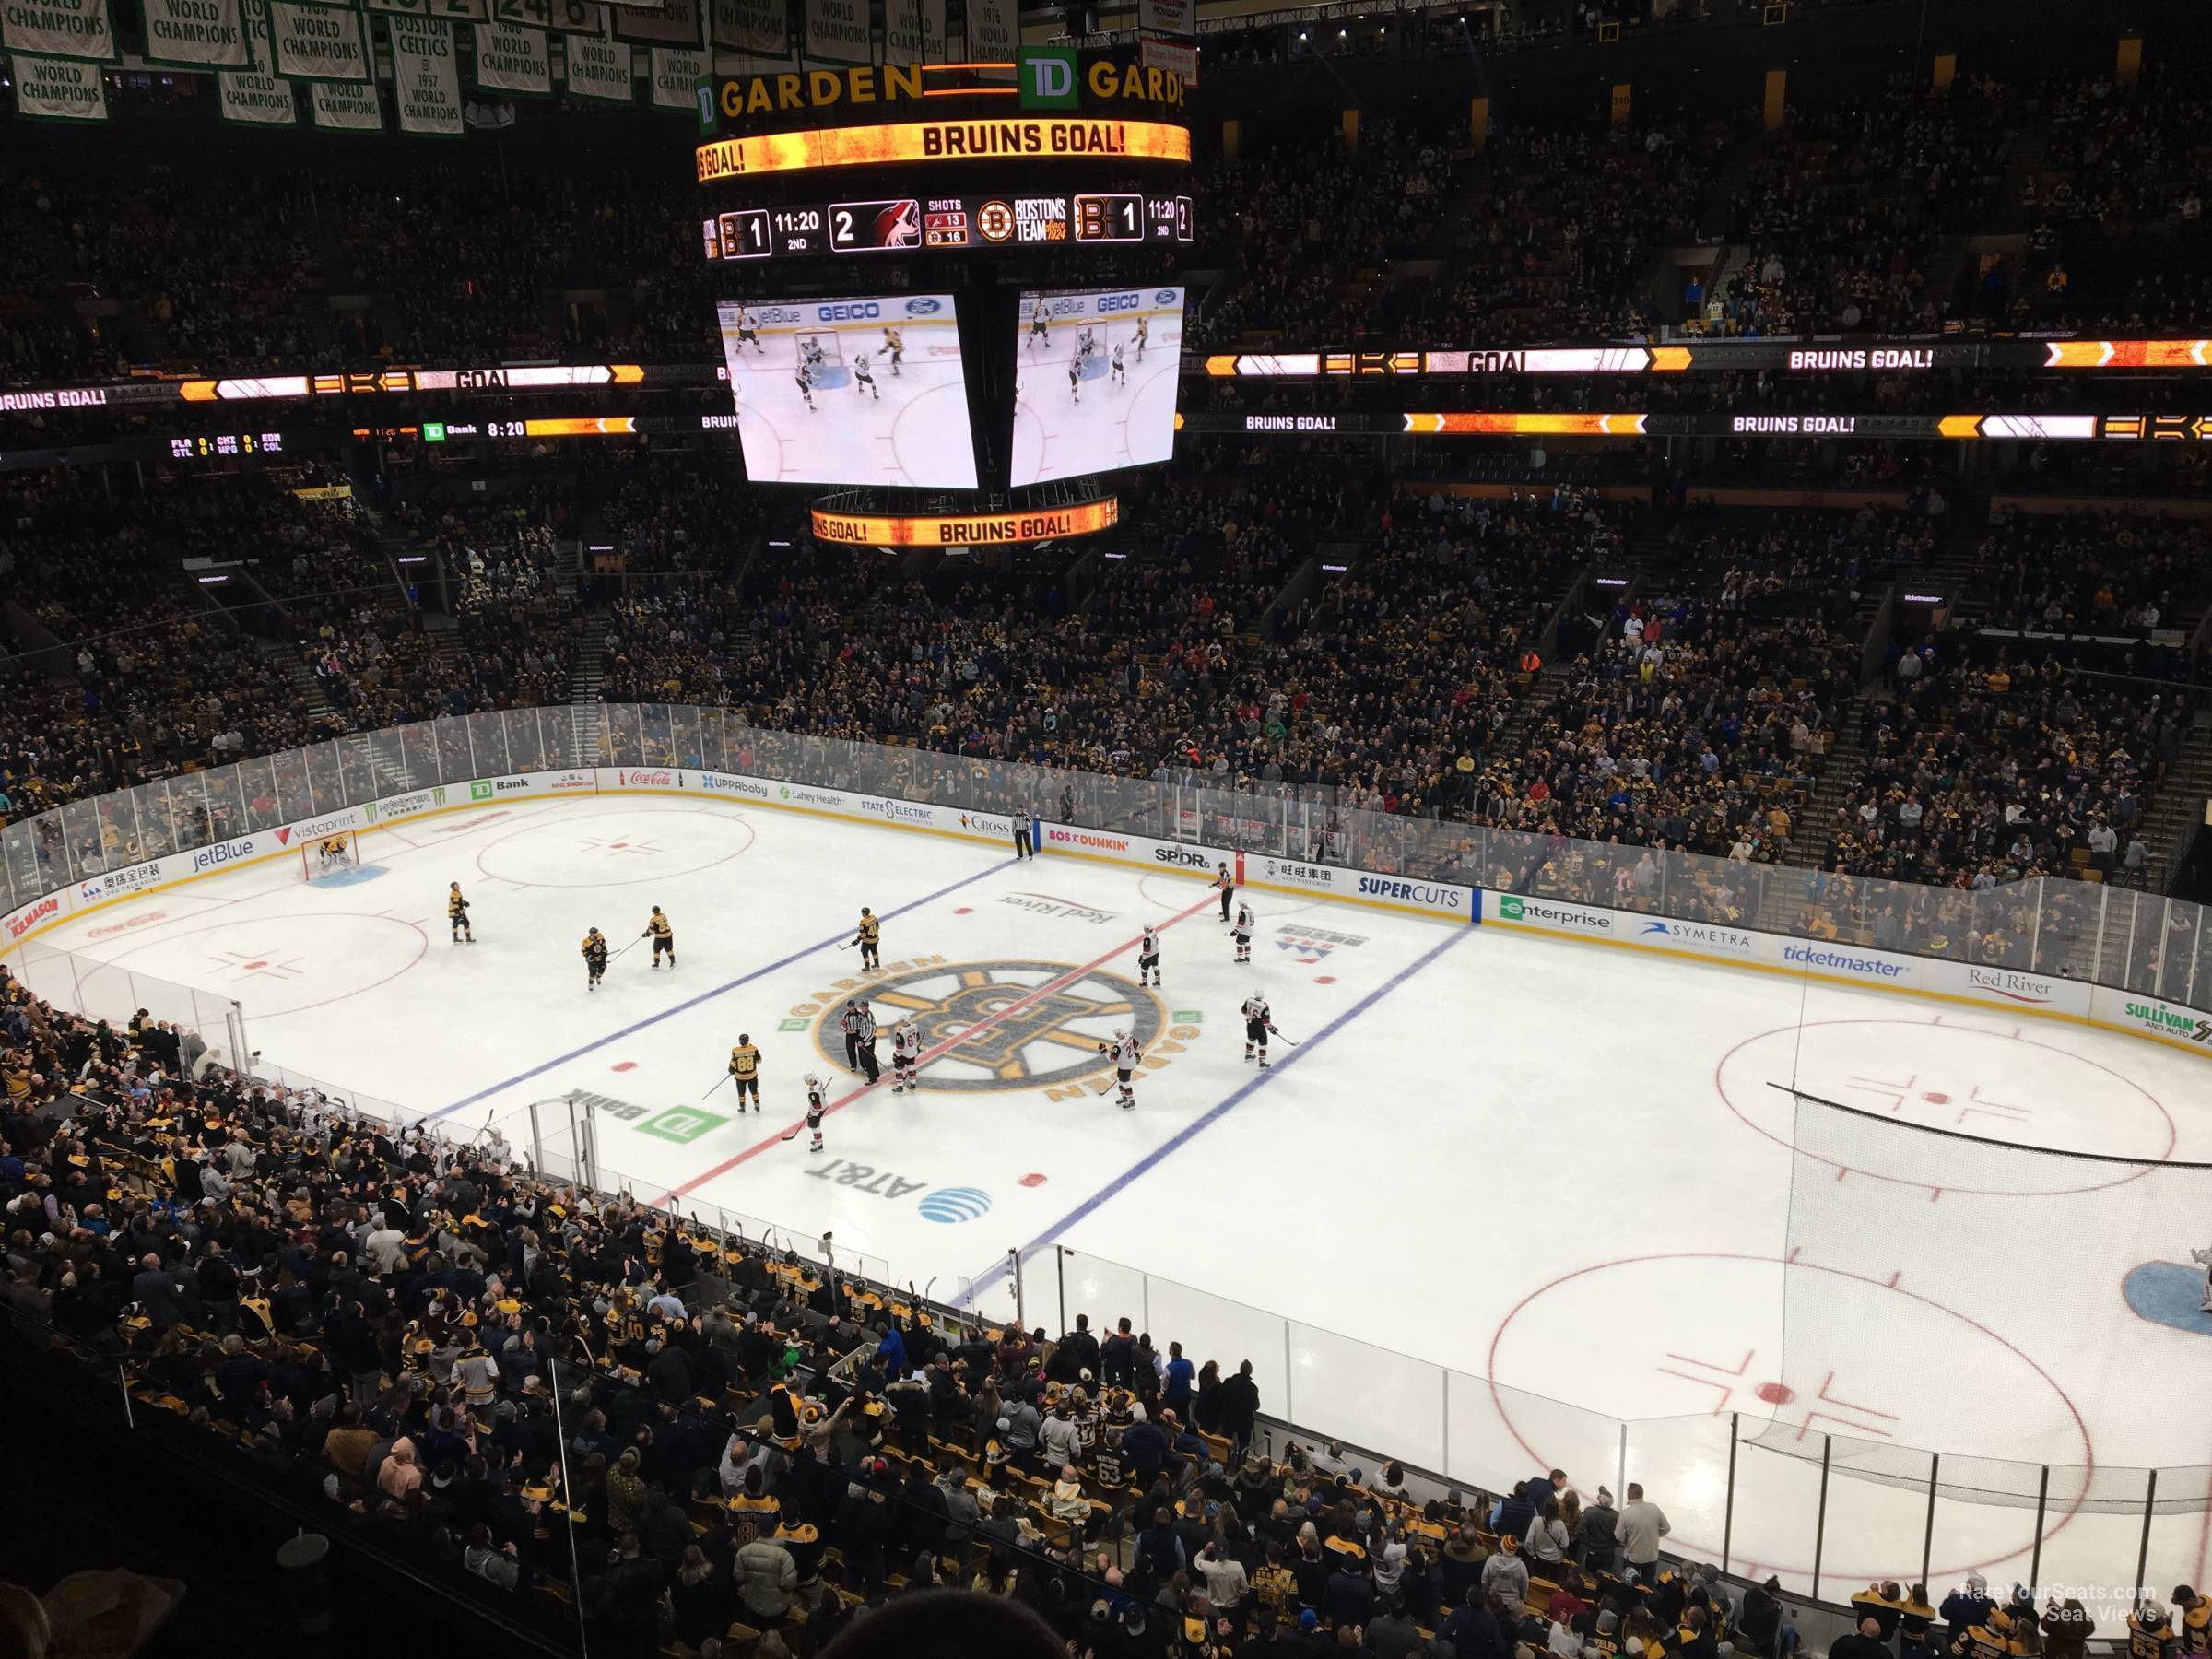 section 328, row 3 seat view  for hockey - td garden